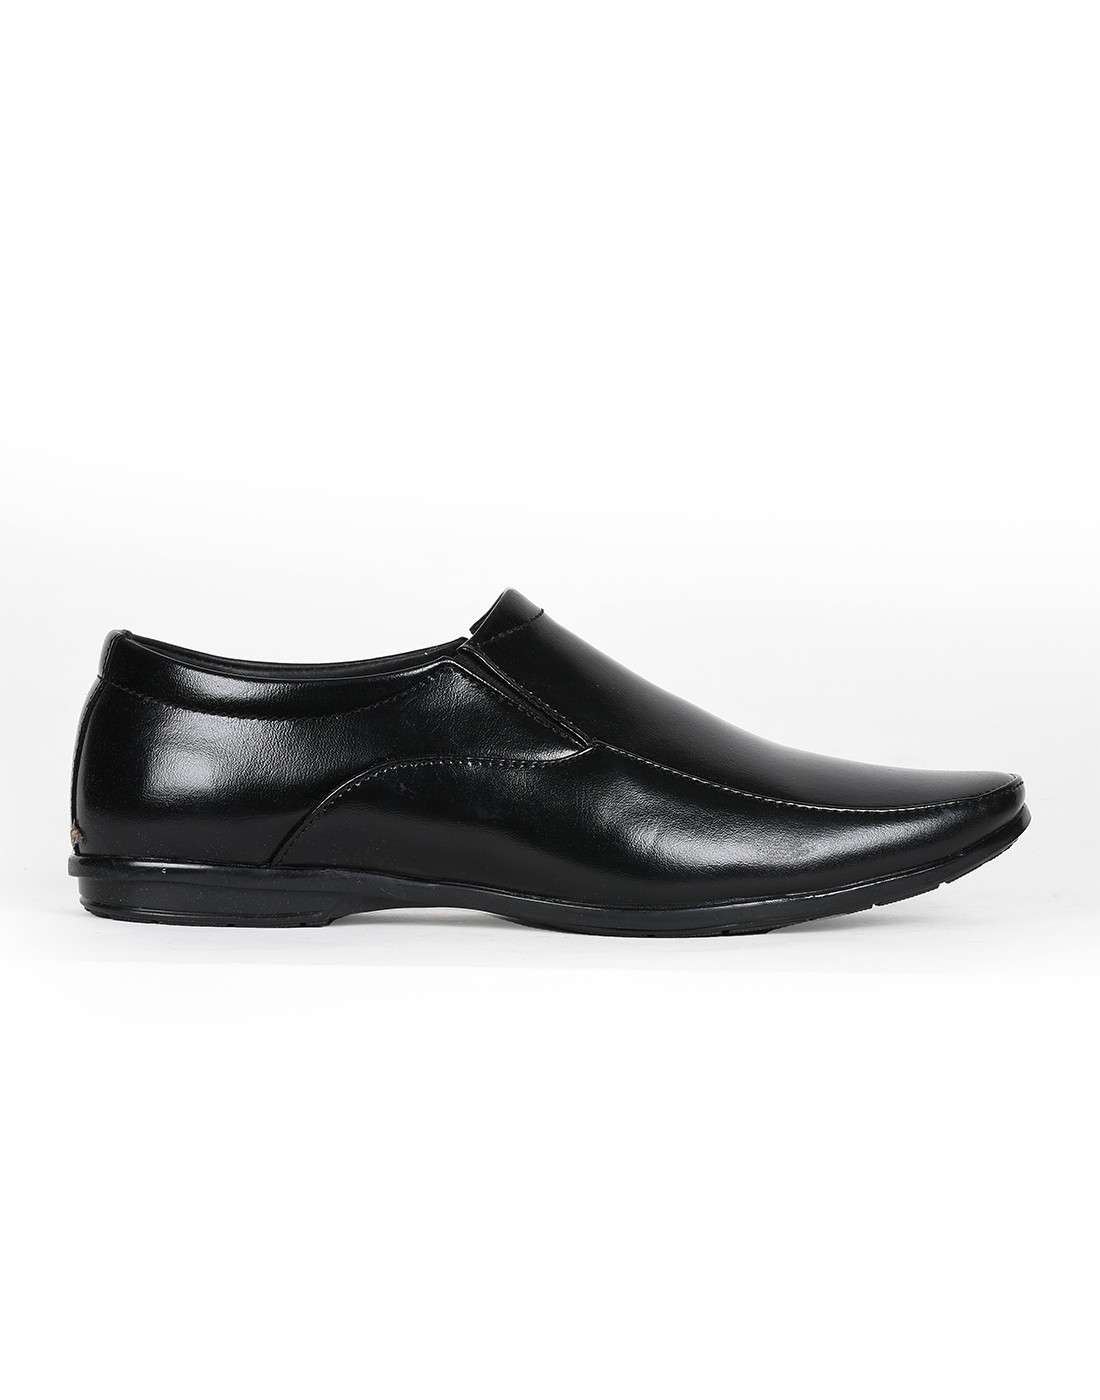 PARAGON Mens Solid Black Formal Shoes | Stylish, Comfortable and lightweight Slip On Loafer Shoes for Men | Formal Wear | Party Wear